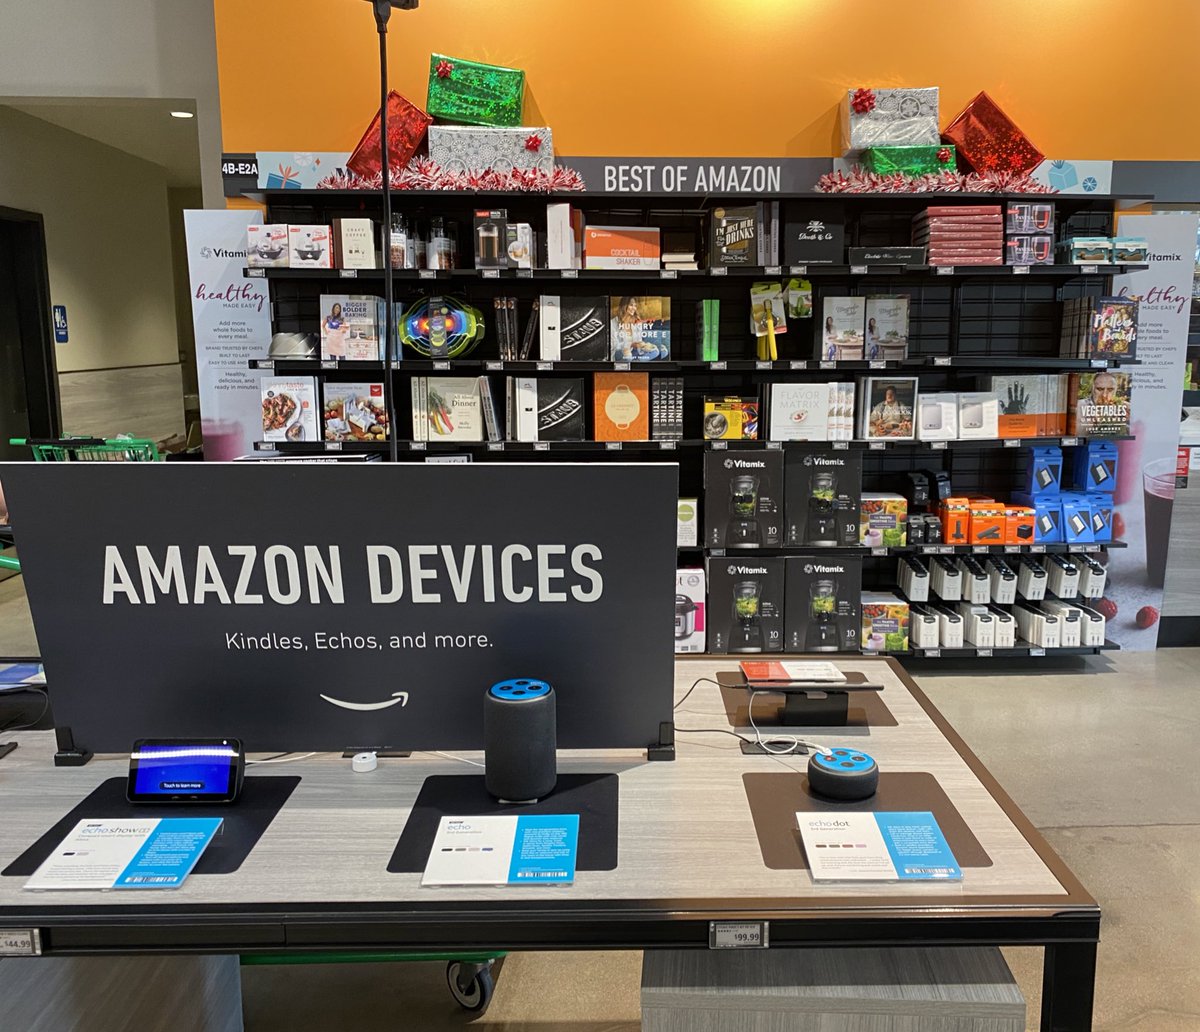 I’d say 5% of real estate was cross-sell to Amazon proper. Devices and “best of” food related goods.